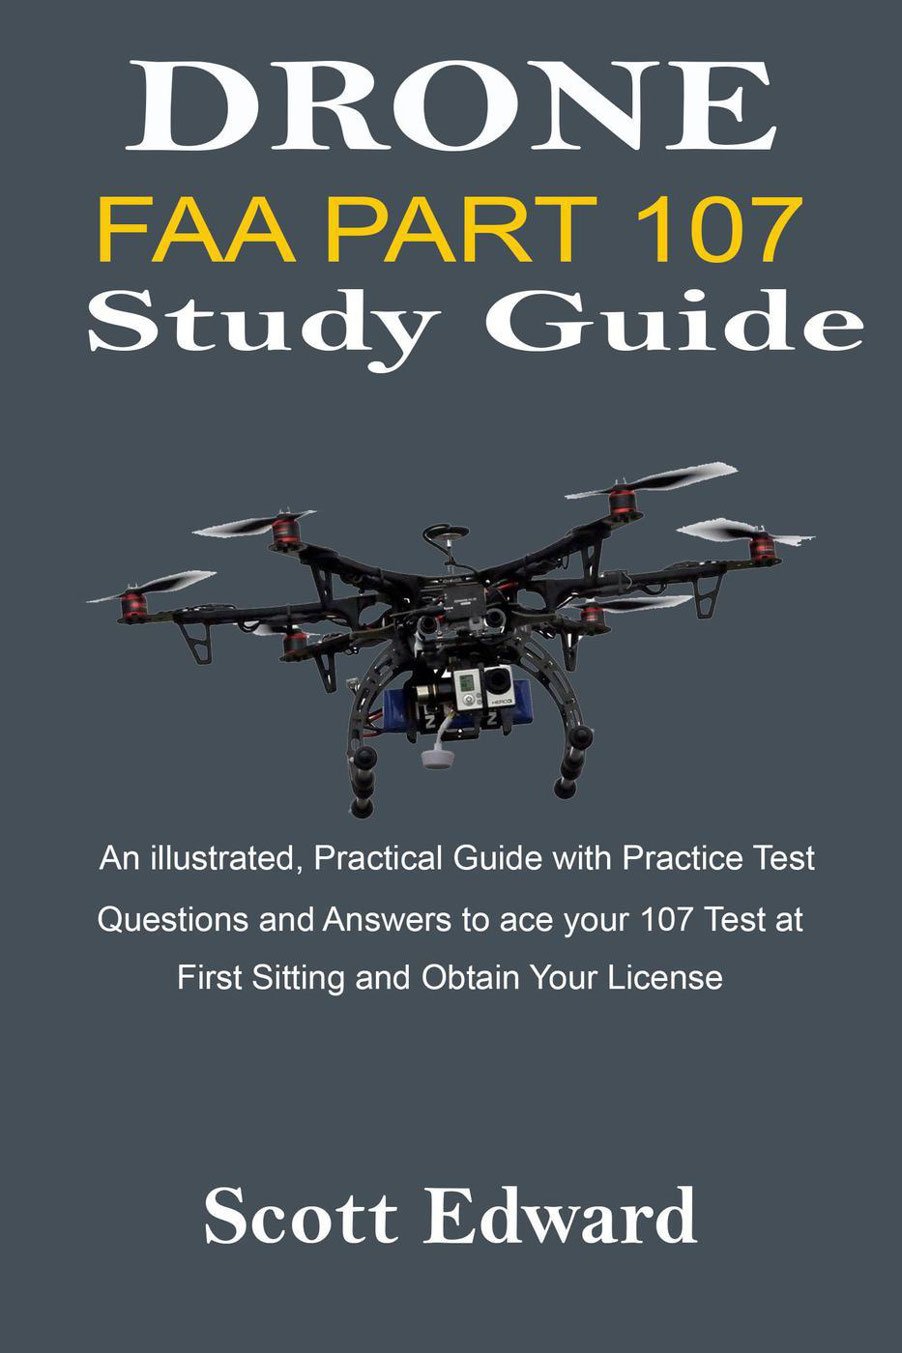 drone-faa-part-107-study-guide-an-illustrated-practical-guide-with